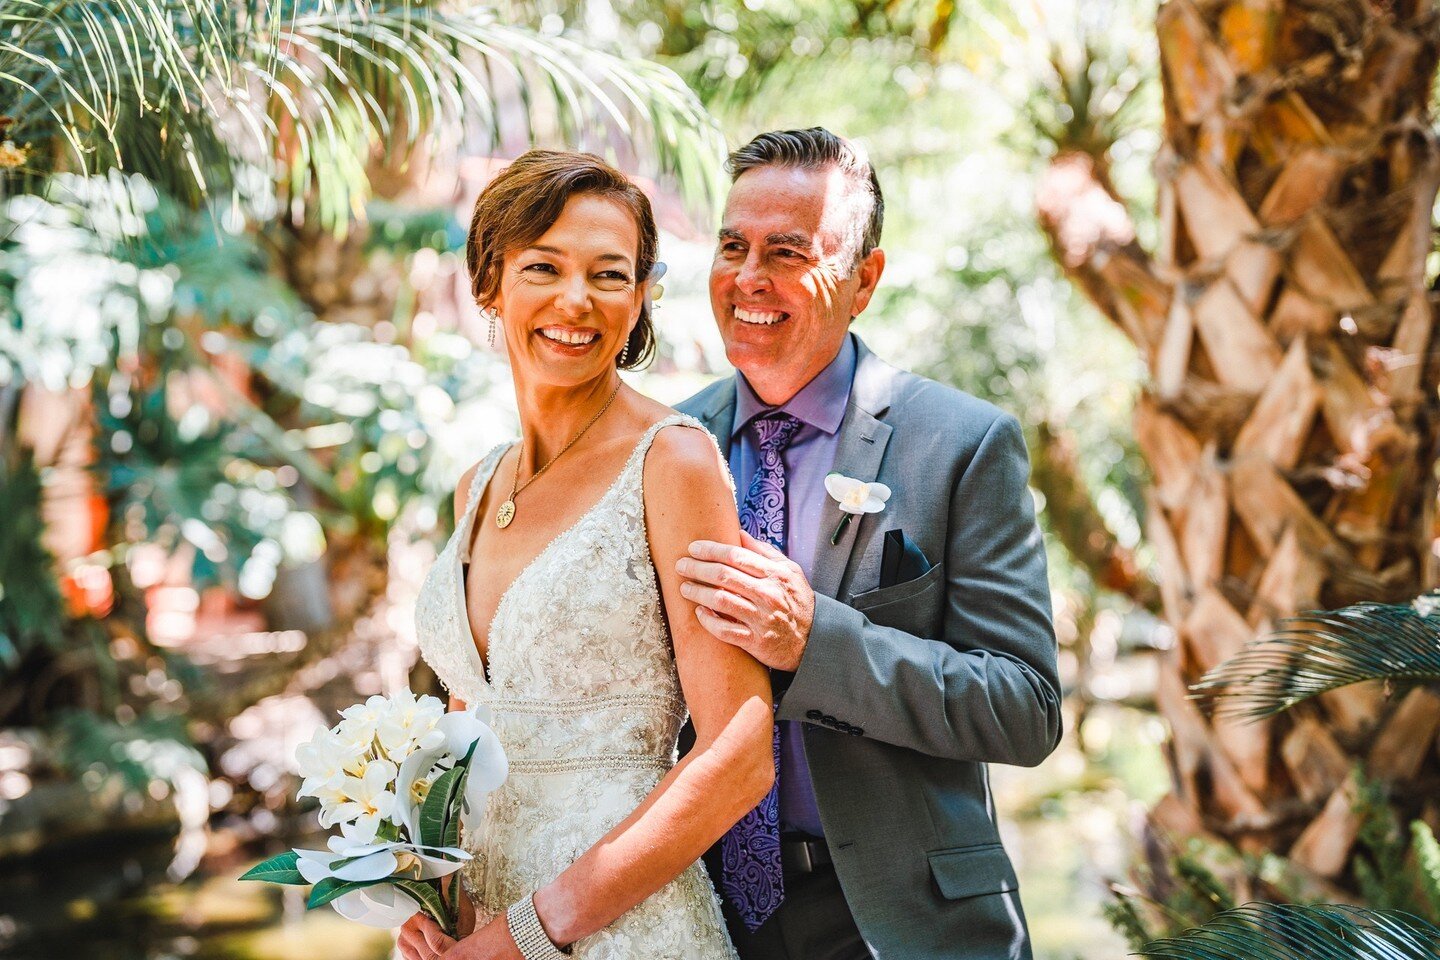 Celebrating love in every frame at Missy + David's dreamy wedding at Paradise Point Resort &amp; Spa. Lush tropics and blue skies created the perfect backdrop for this special day.